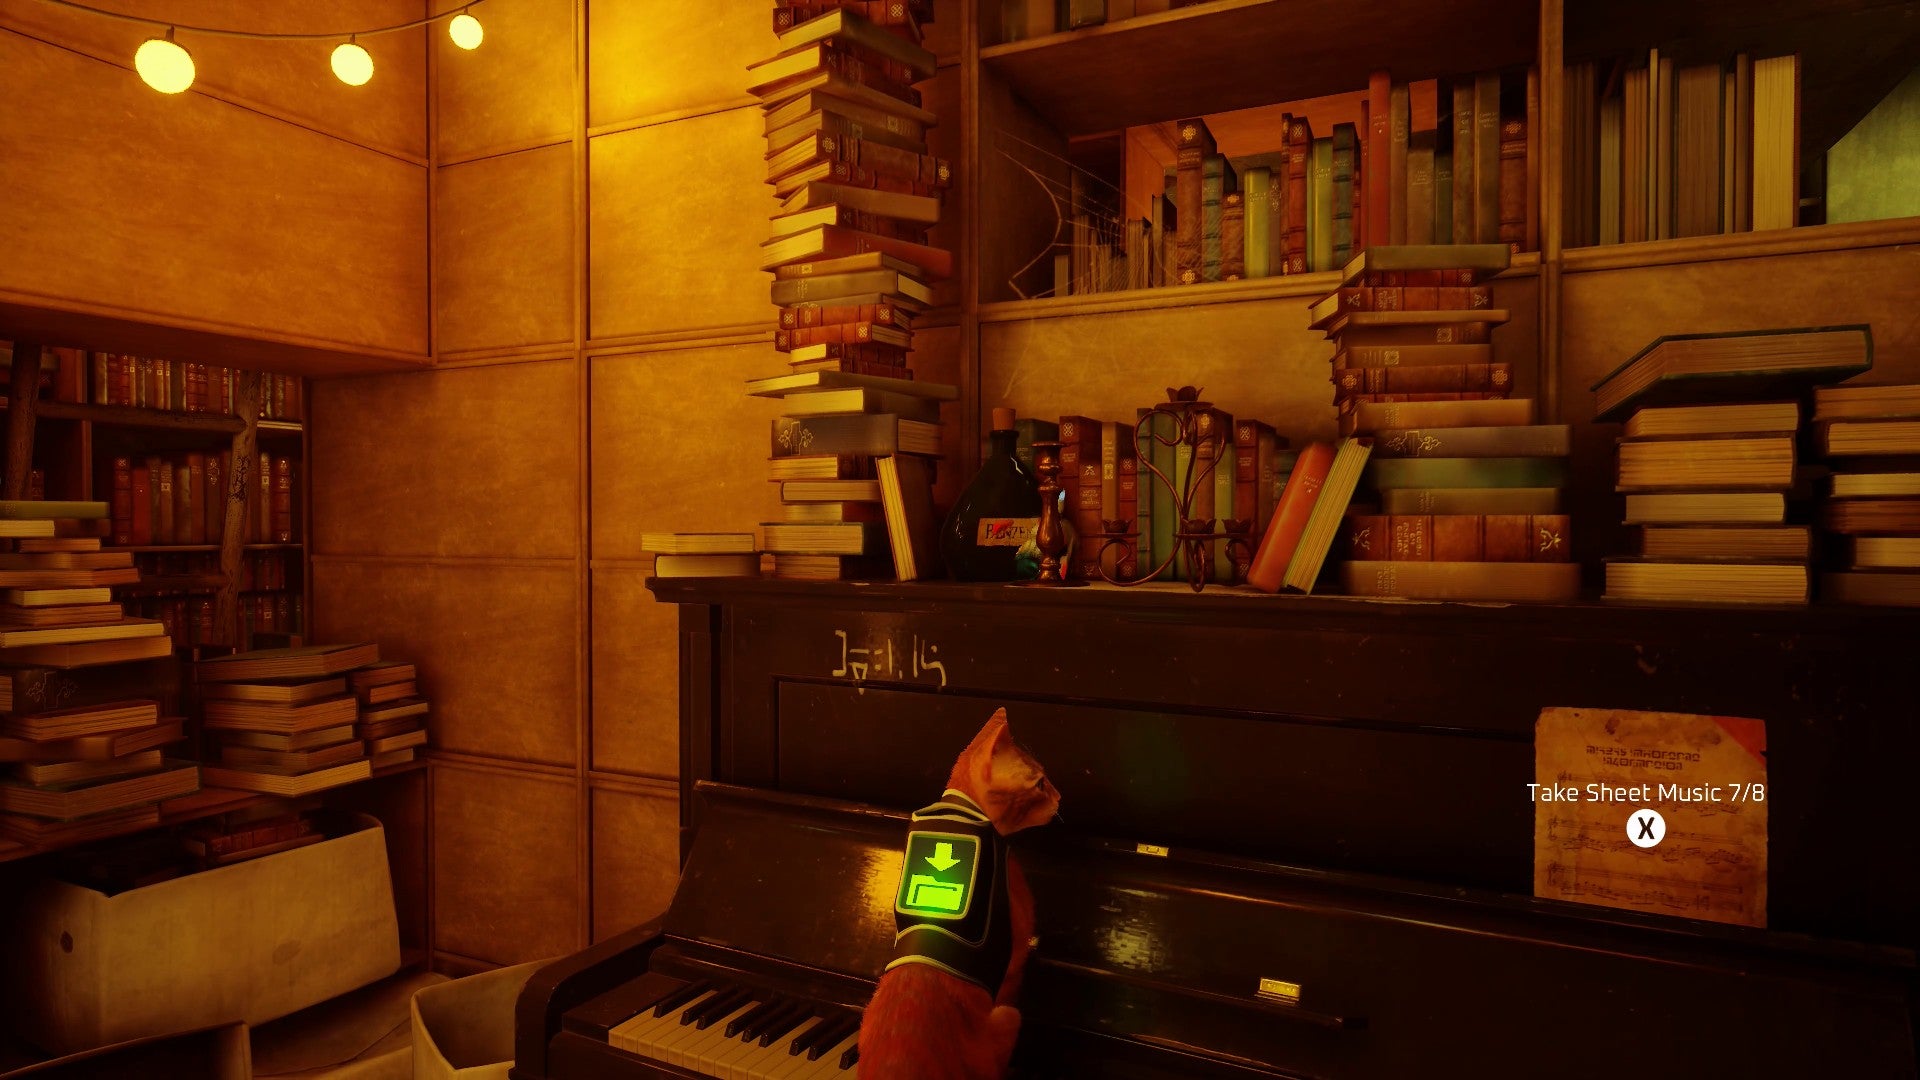 Stray screenshot showing a cat perched on a piano surrounded by stacks of books. The cat is staring at a piece of sheet music.